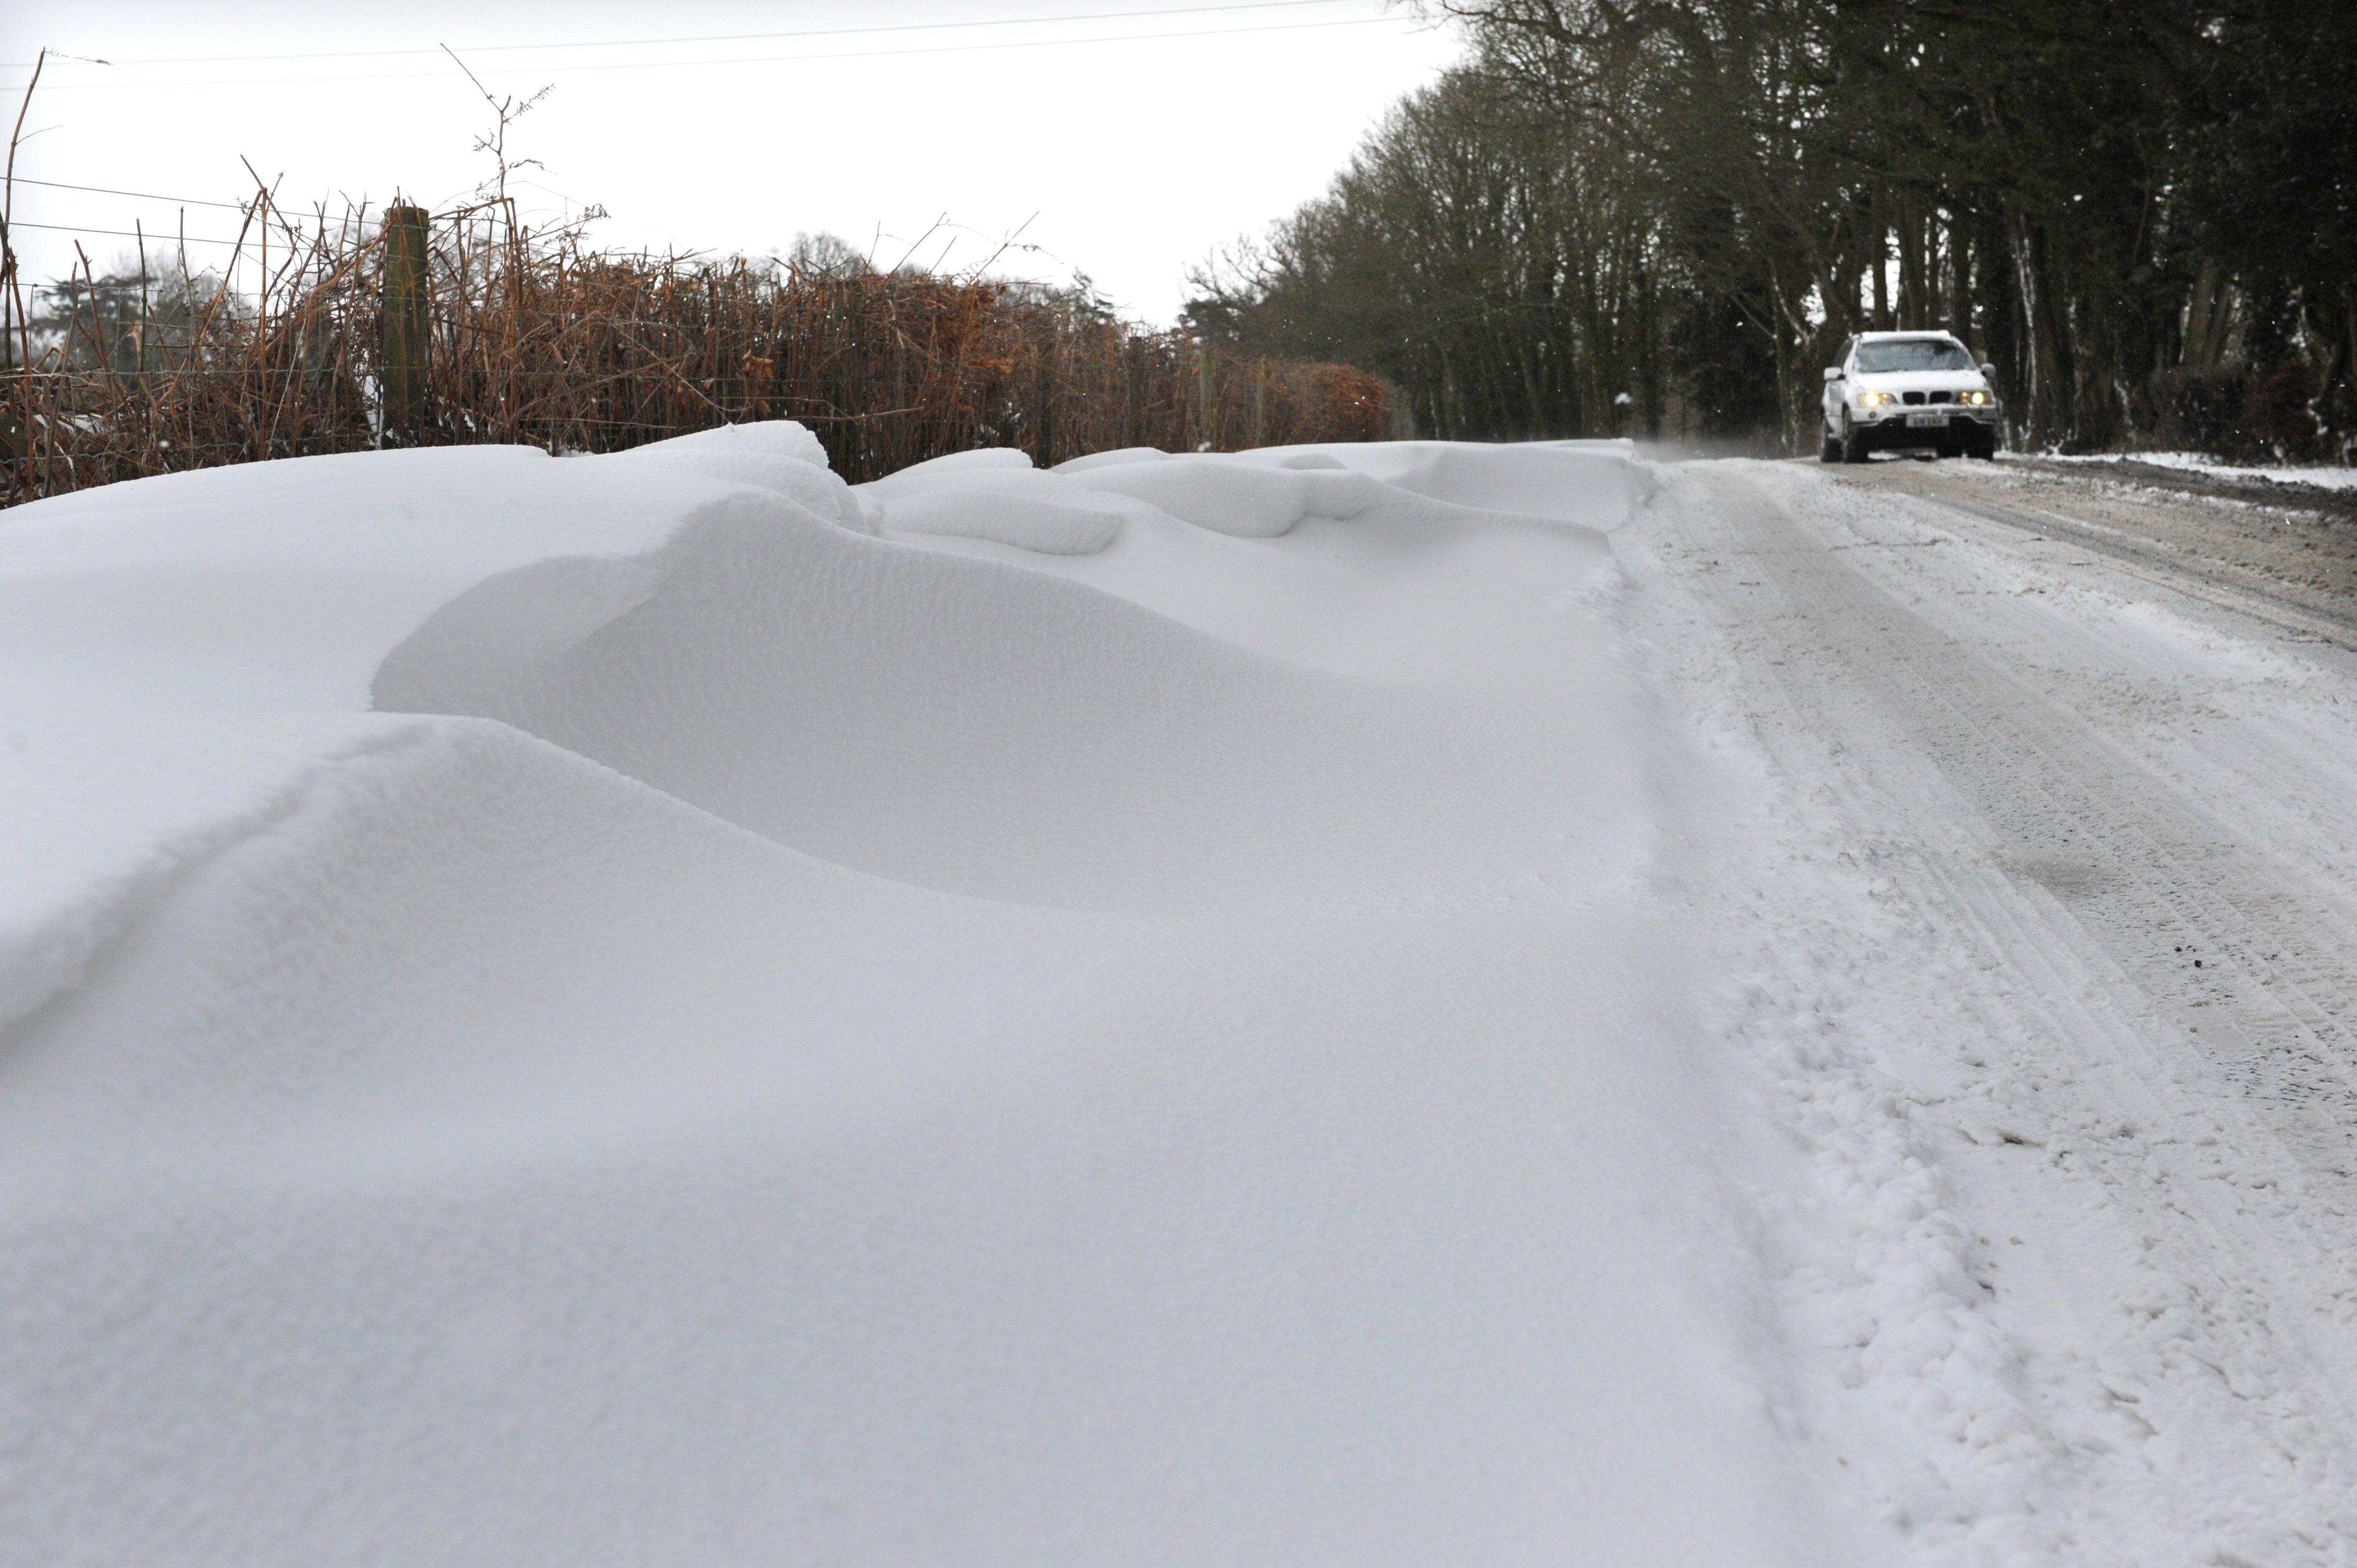 Big snow drifts built up near Monks Gate in March 2013